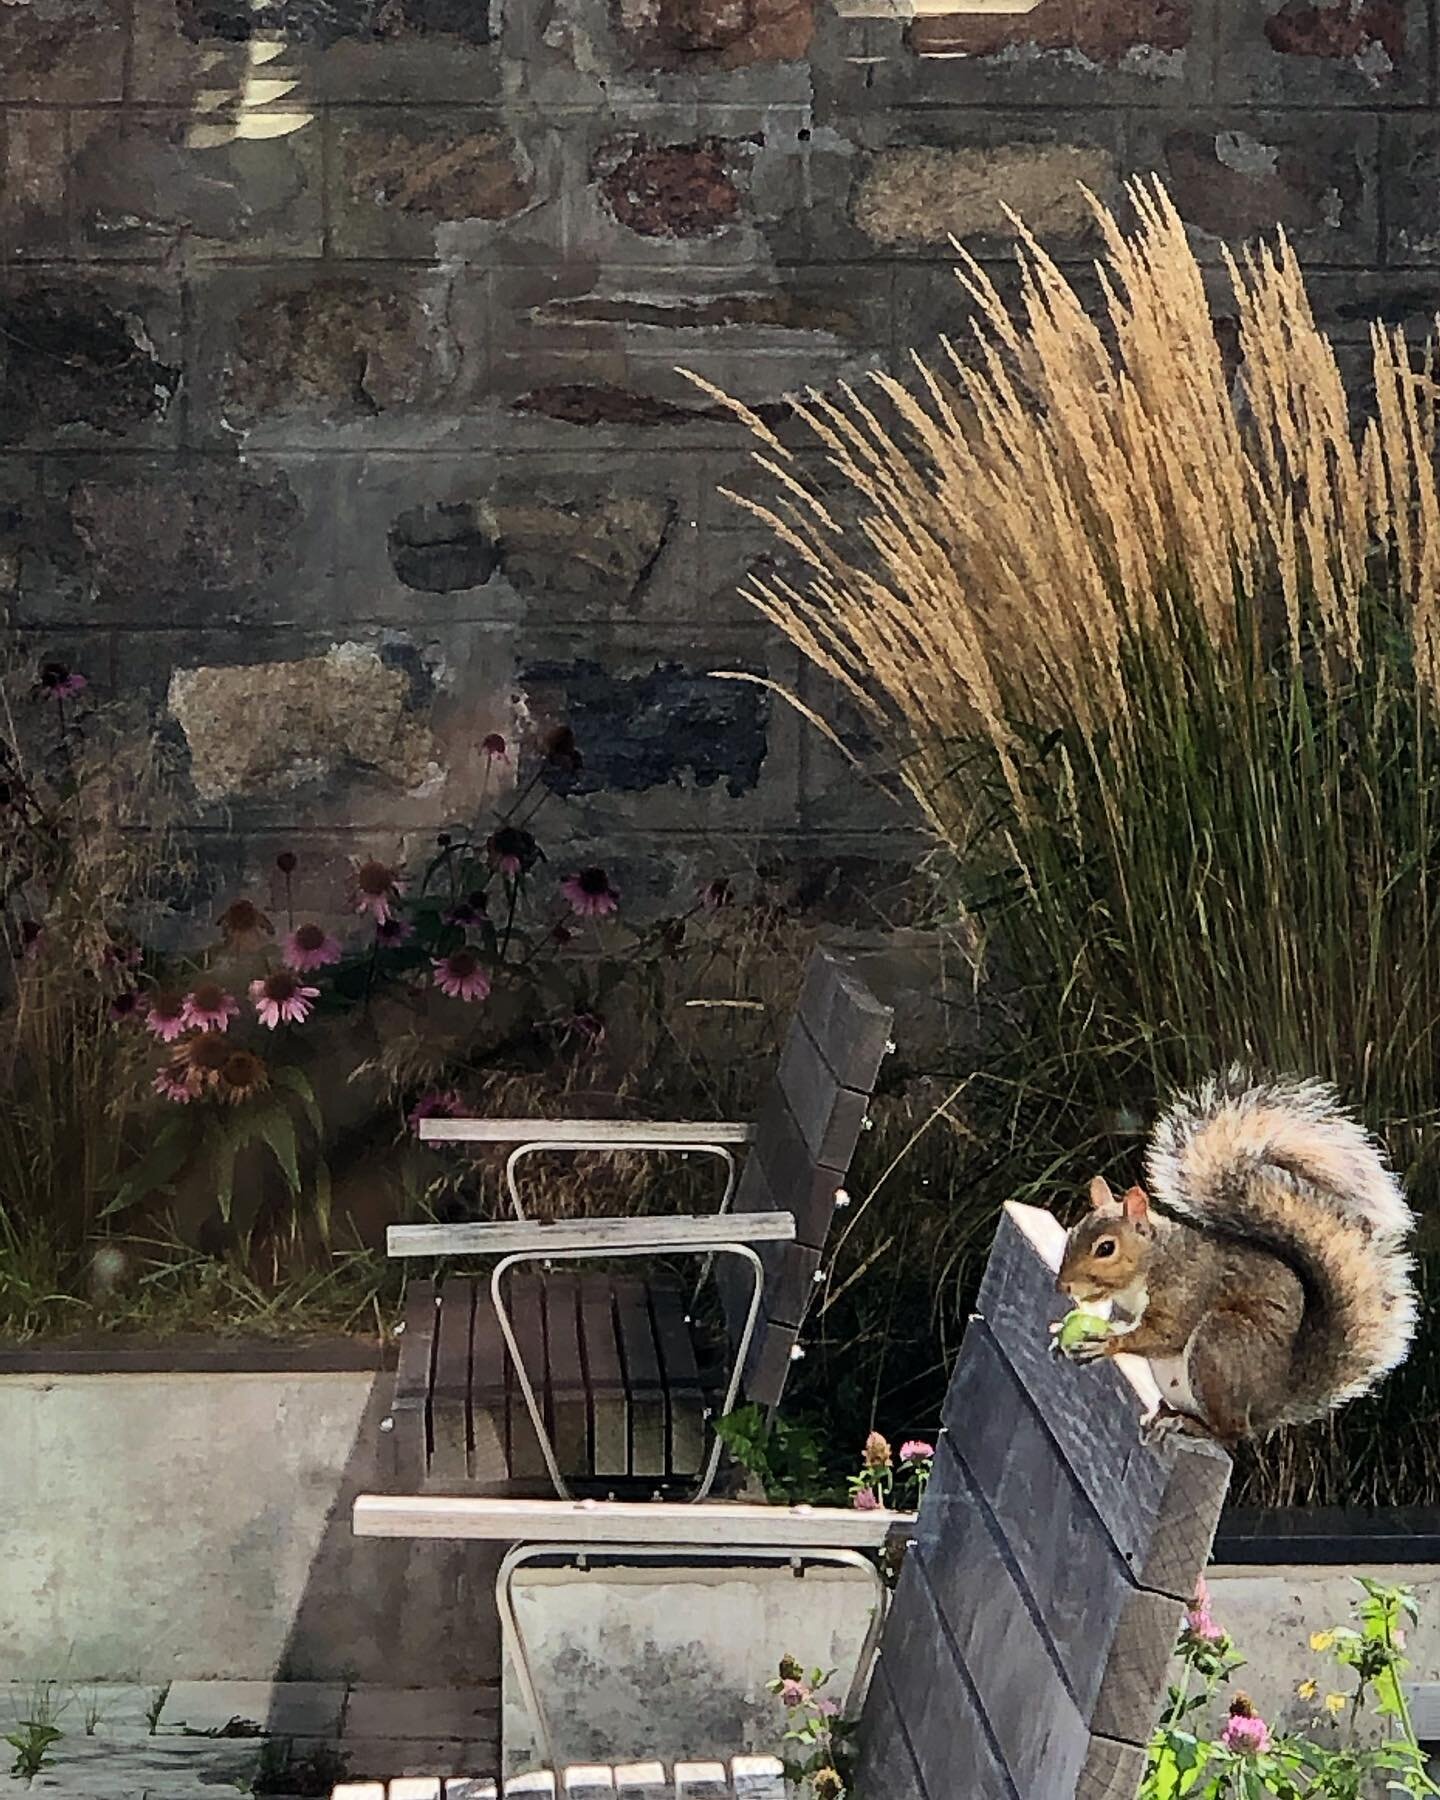 When the humans are away, the squirrels take over the courtyard at @kitchenerlibrary